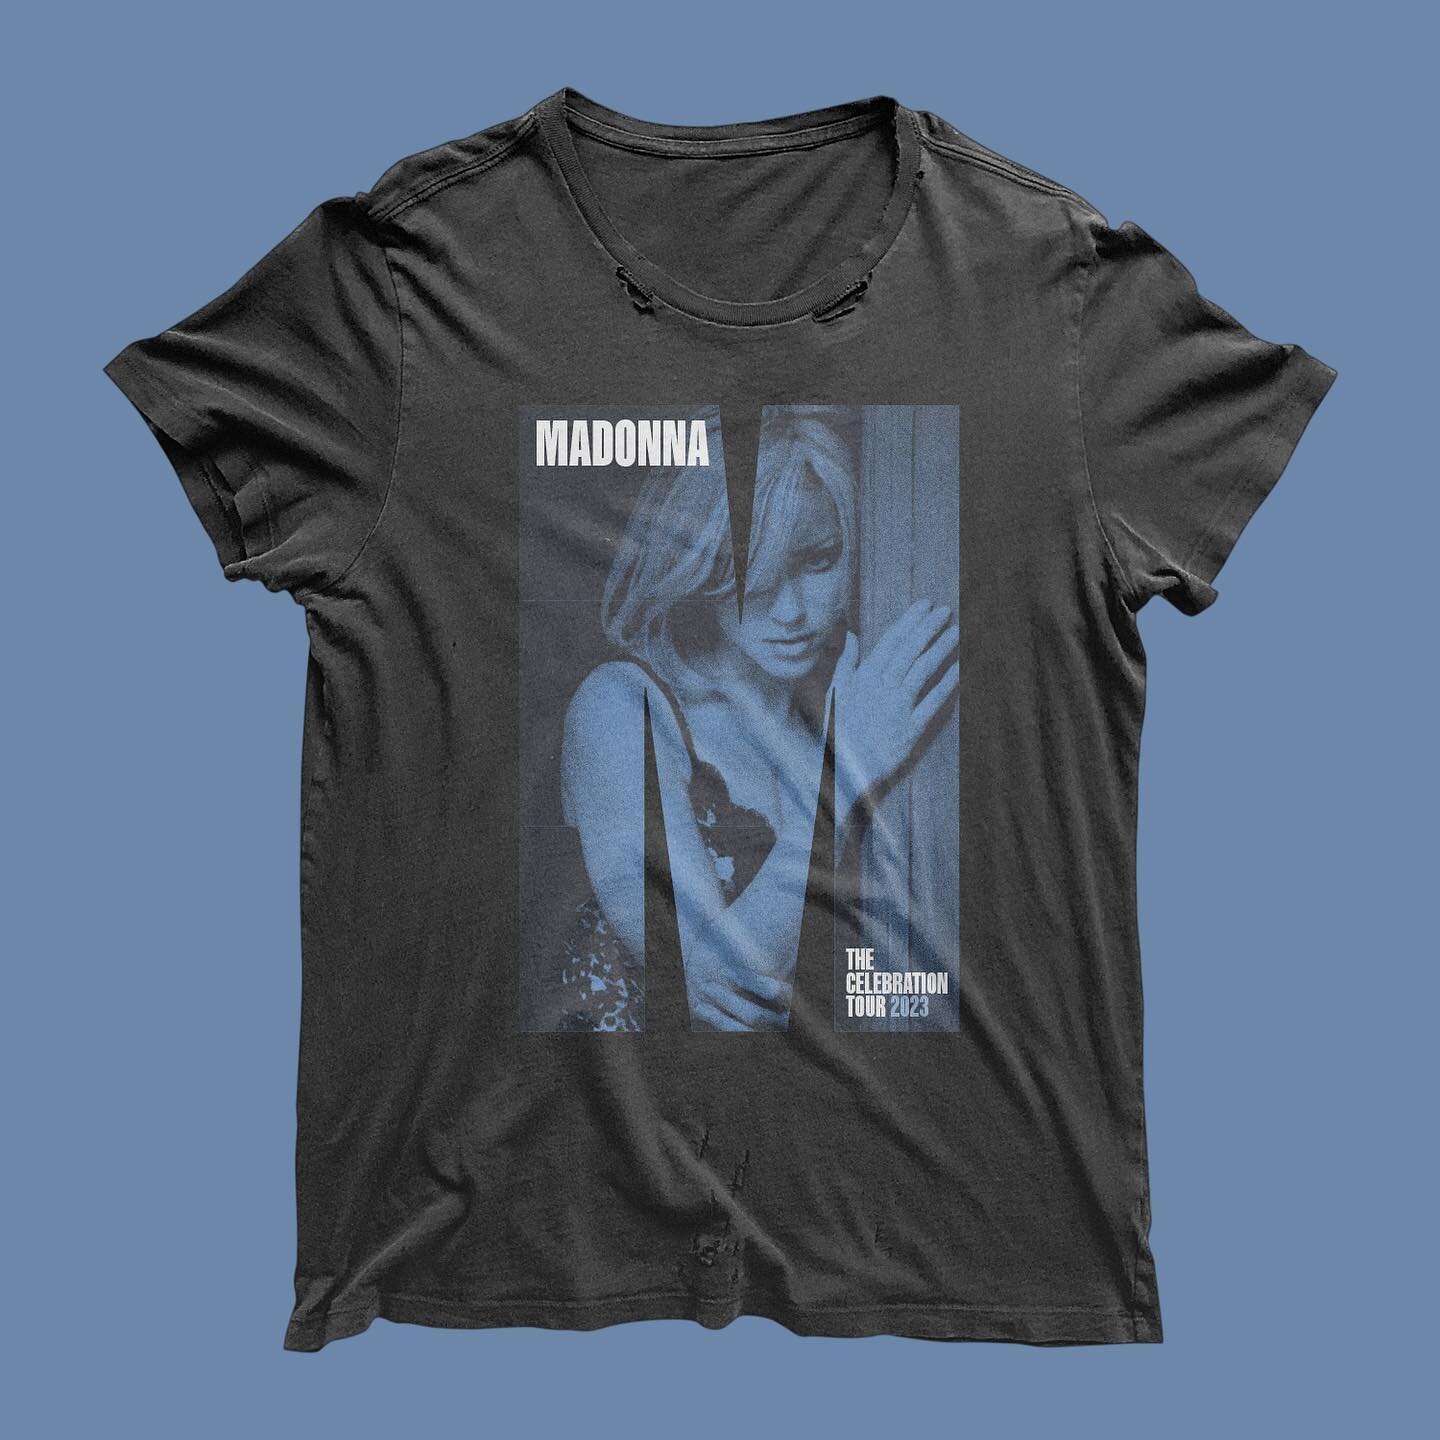 Here&rsquo;s another @madonna Celebration Tour shirt concept, which pulls from her incredible &ldquo;I Want You&rdquo; music video (yes, it&rsquo;s a Marvin Gaye cover that she totally owns). Do you like the design on black or white?